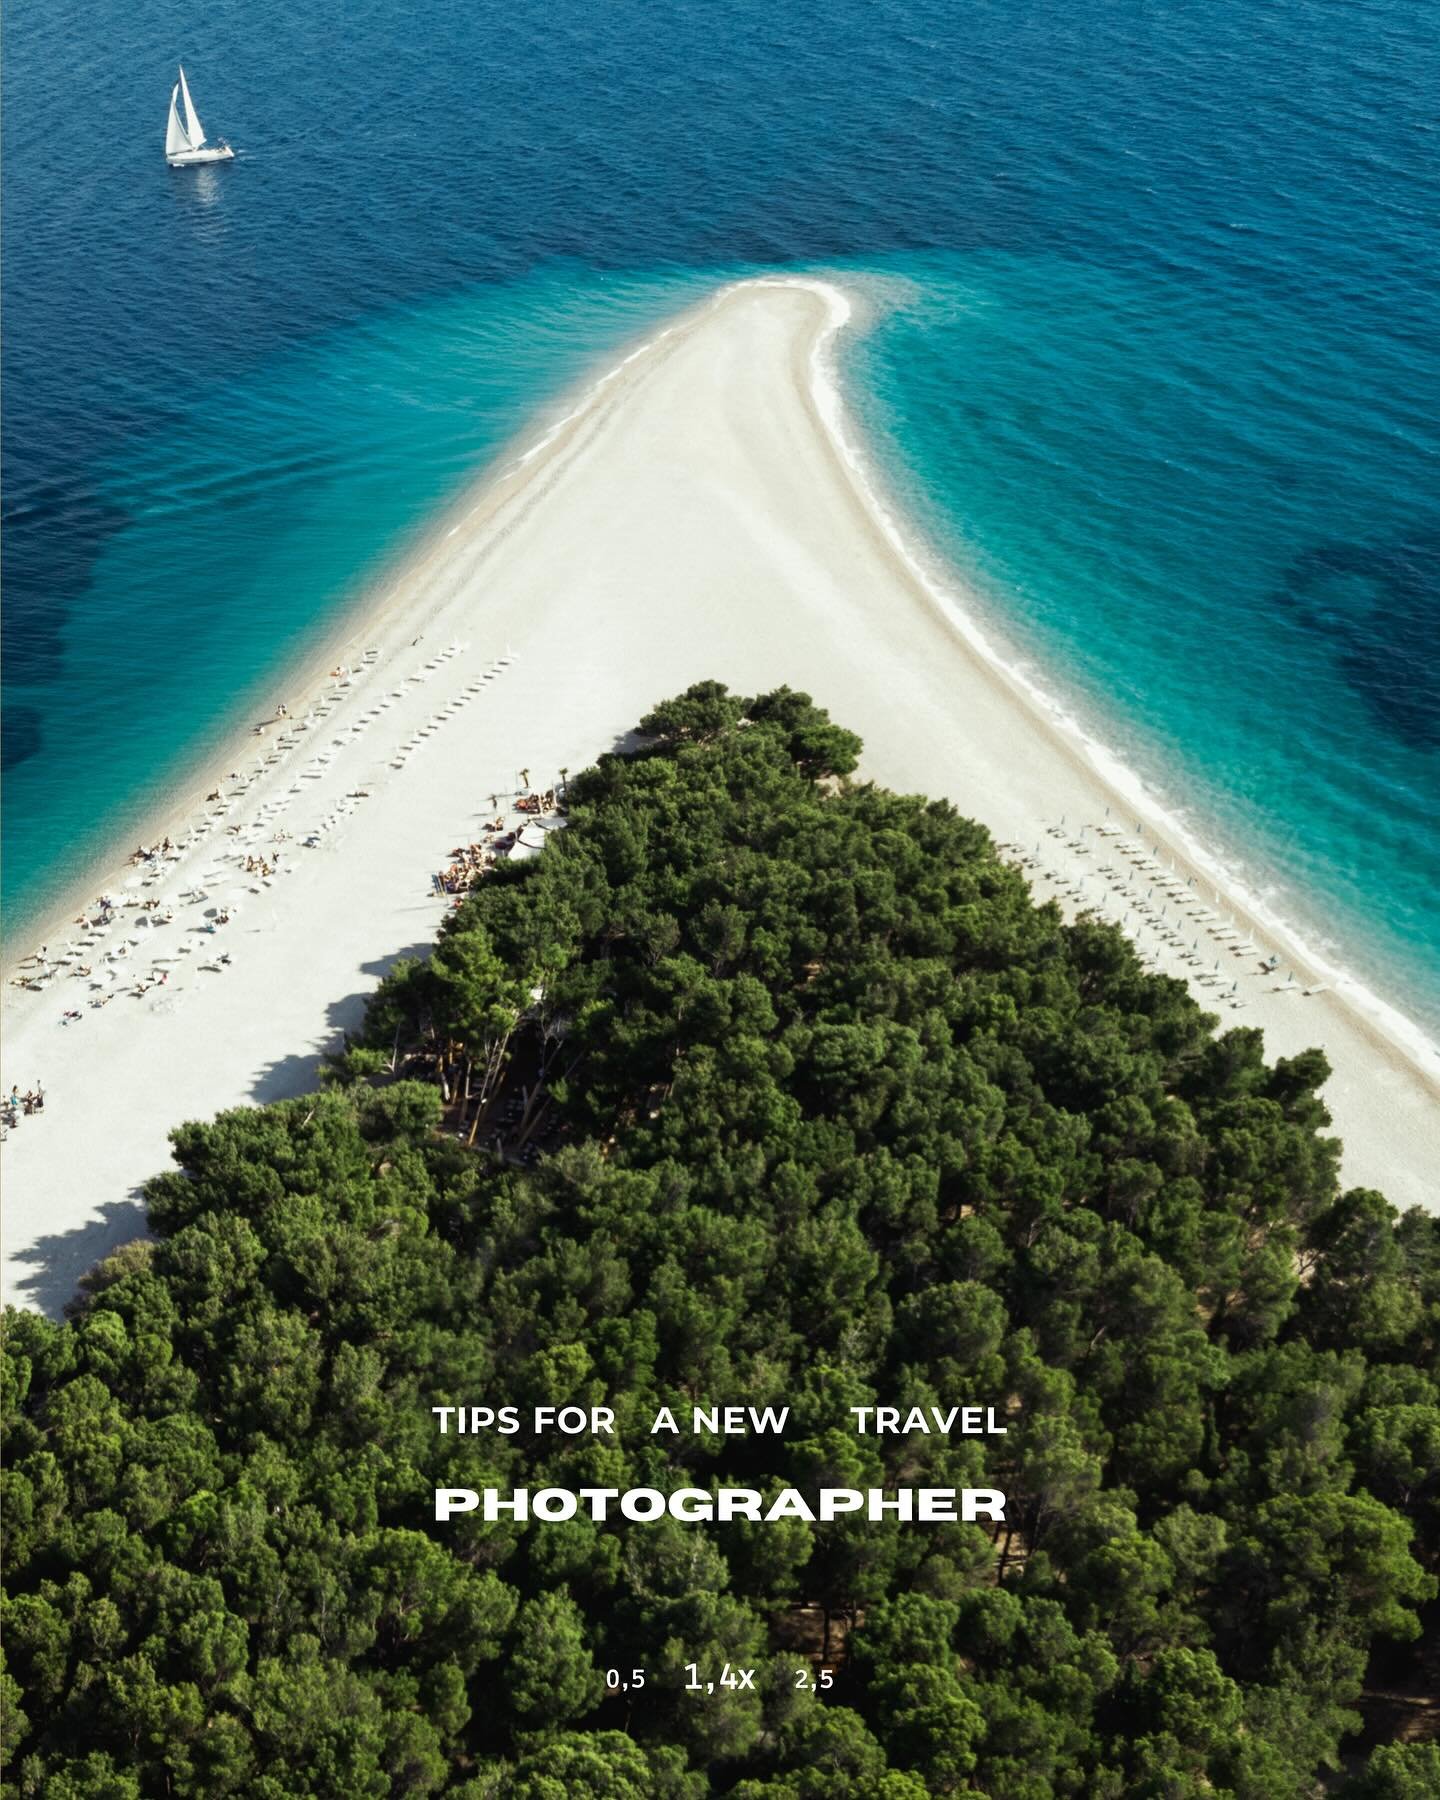 ✈️🇭🇷 Calling all aspiring travel photographers!
📸 On my second segment of Tips for a new travel Photographer I wanted to focus on Drone Photography! Embark on your photography journey with confidence using these pro tips gathered from my own adven